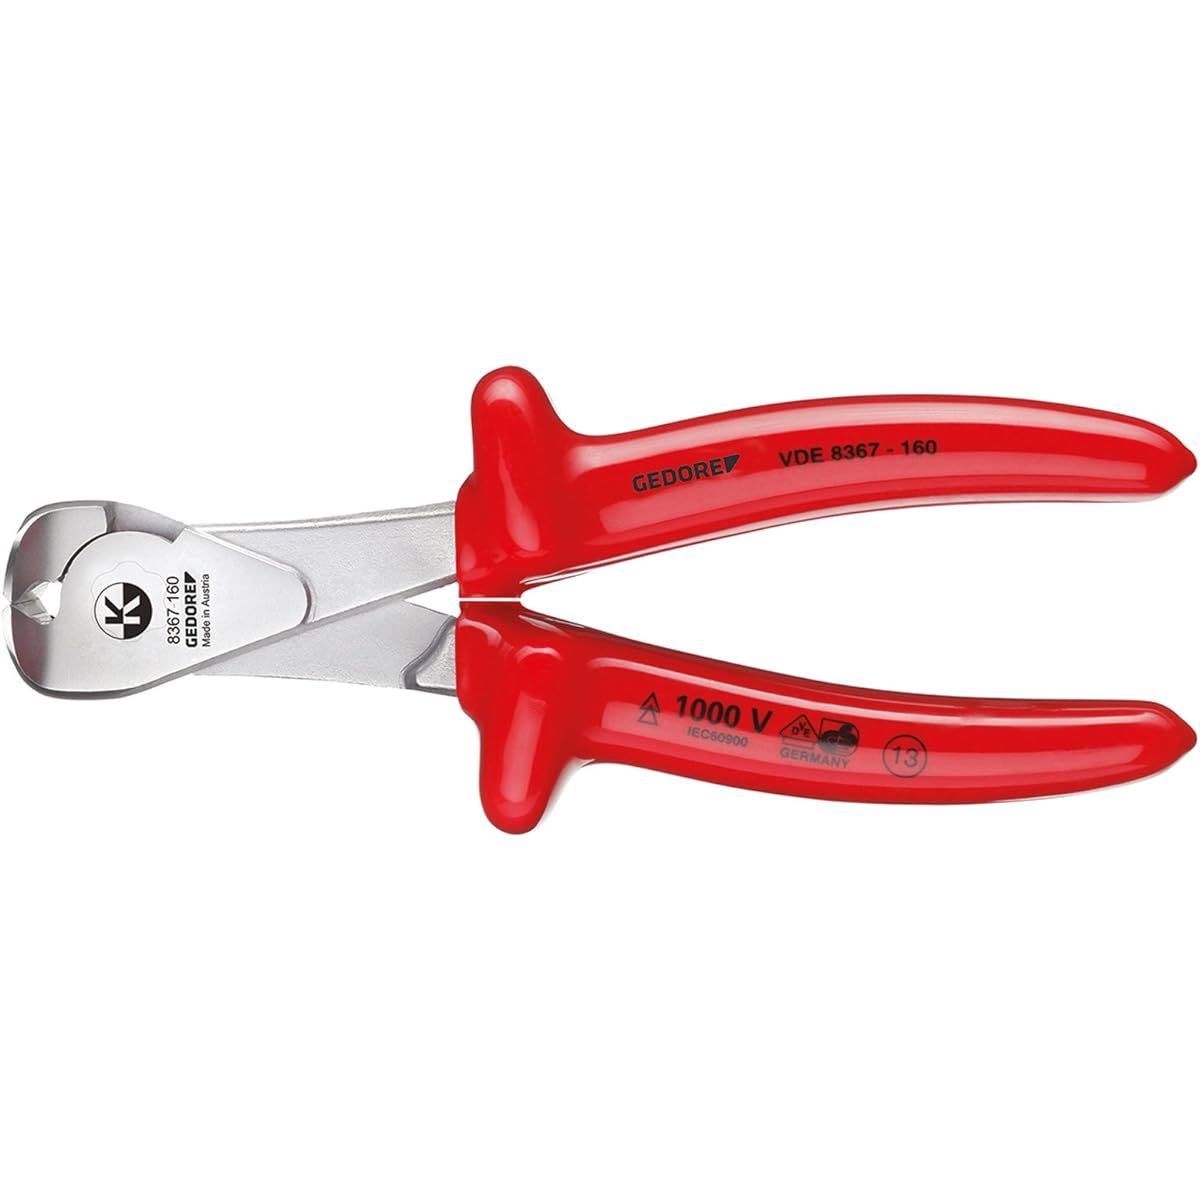 Gedore Insulated Pliers 2324830